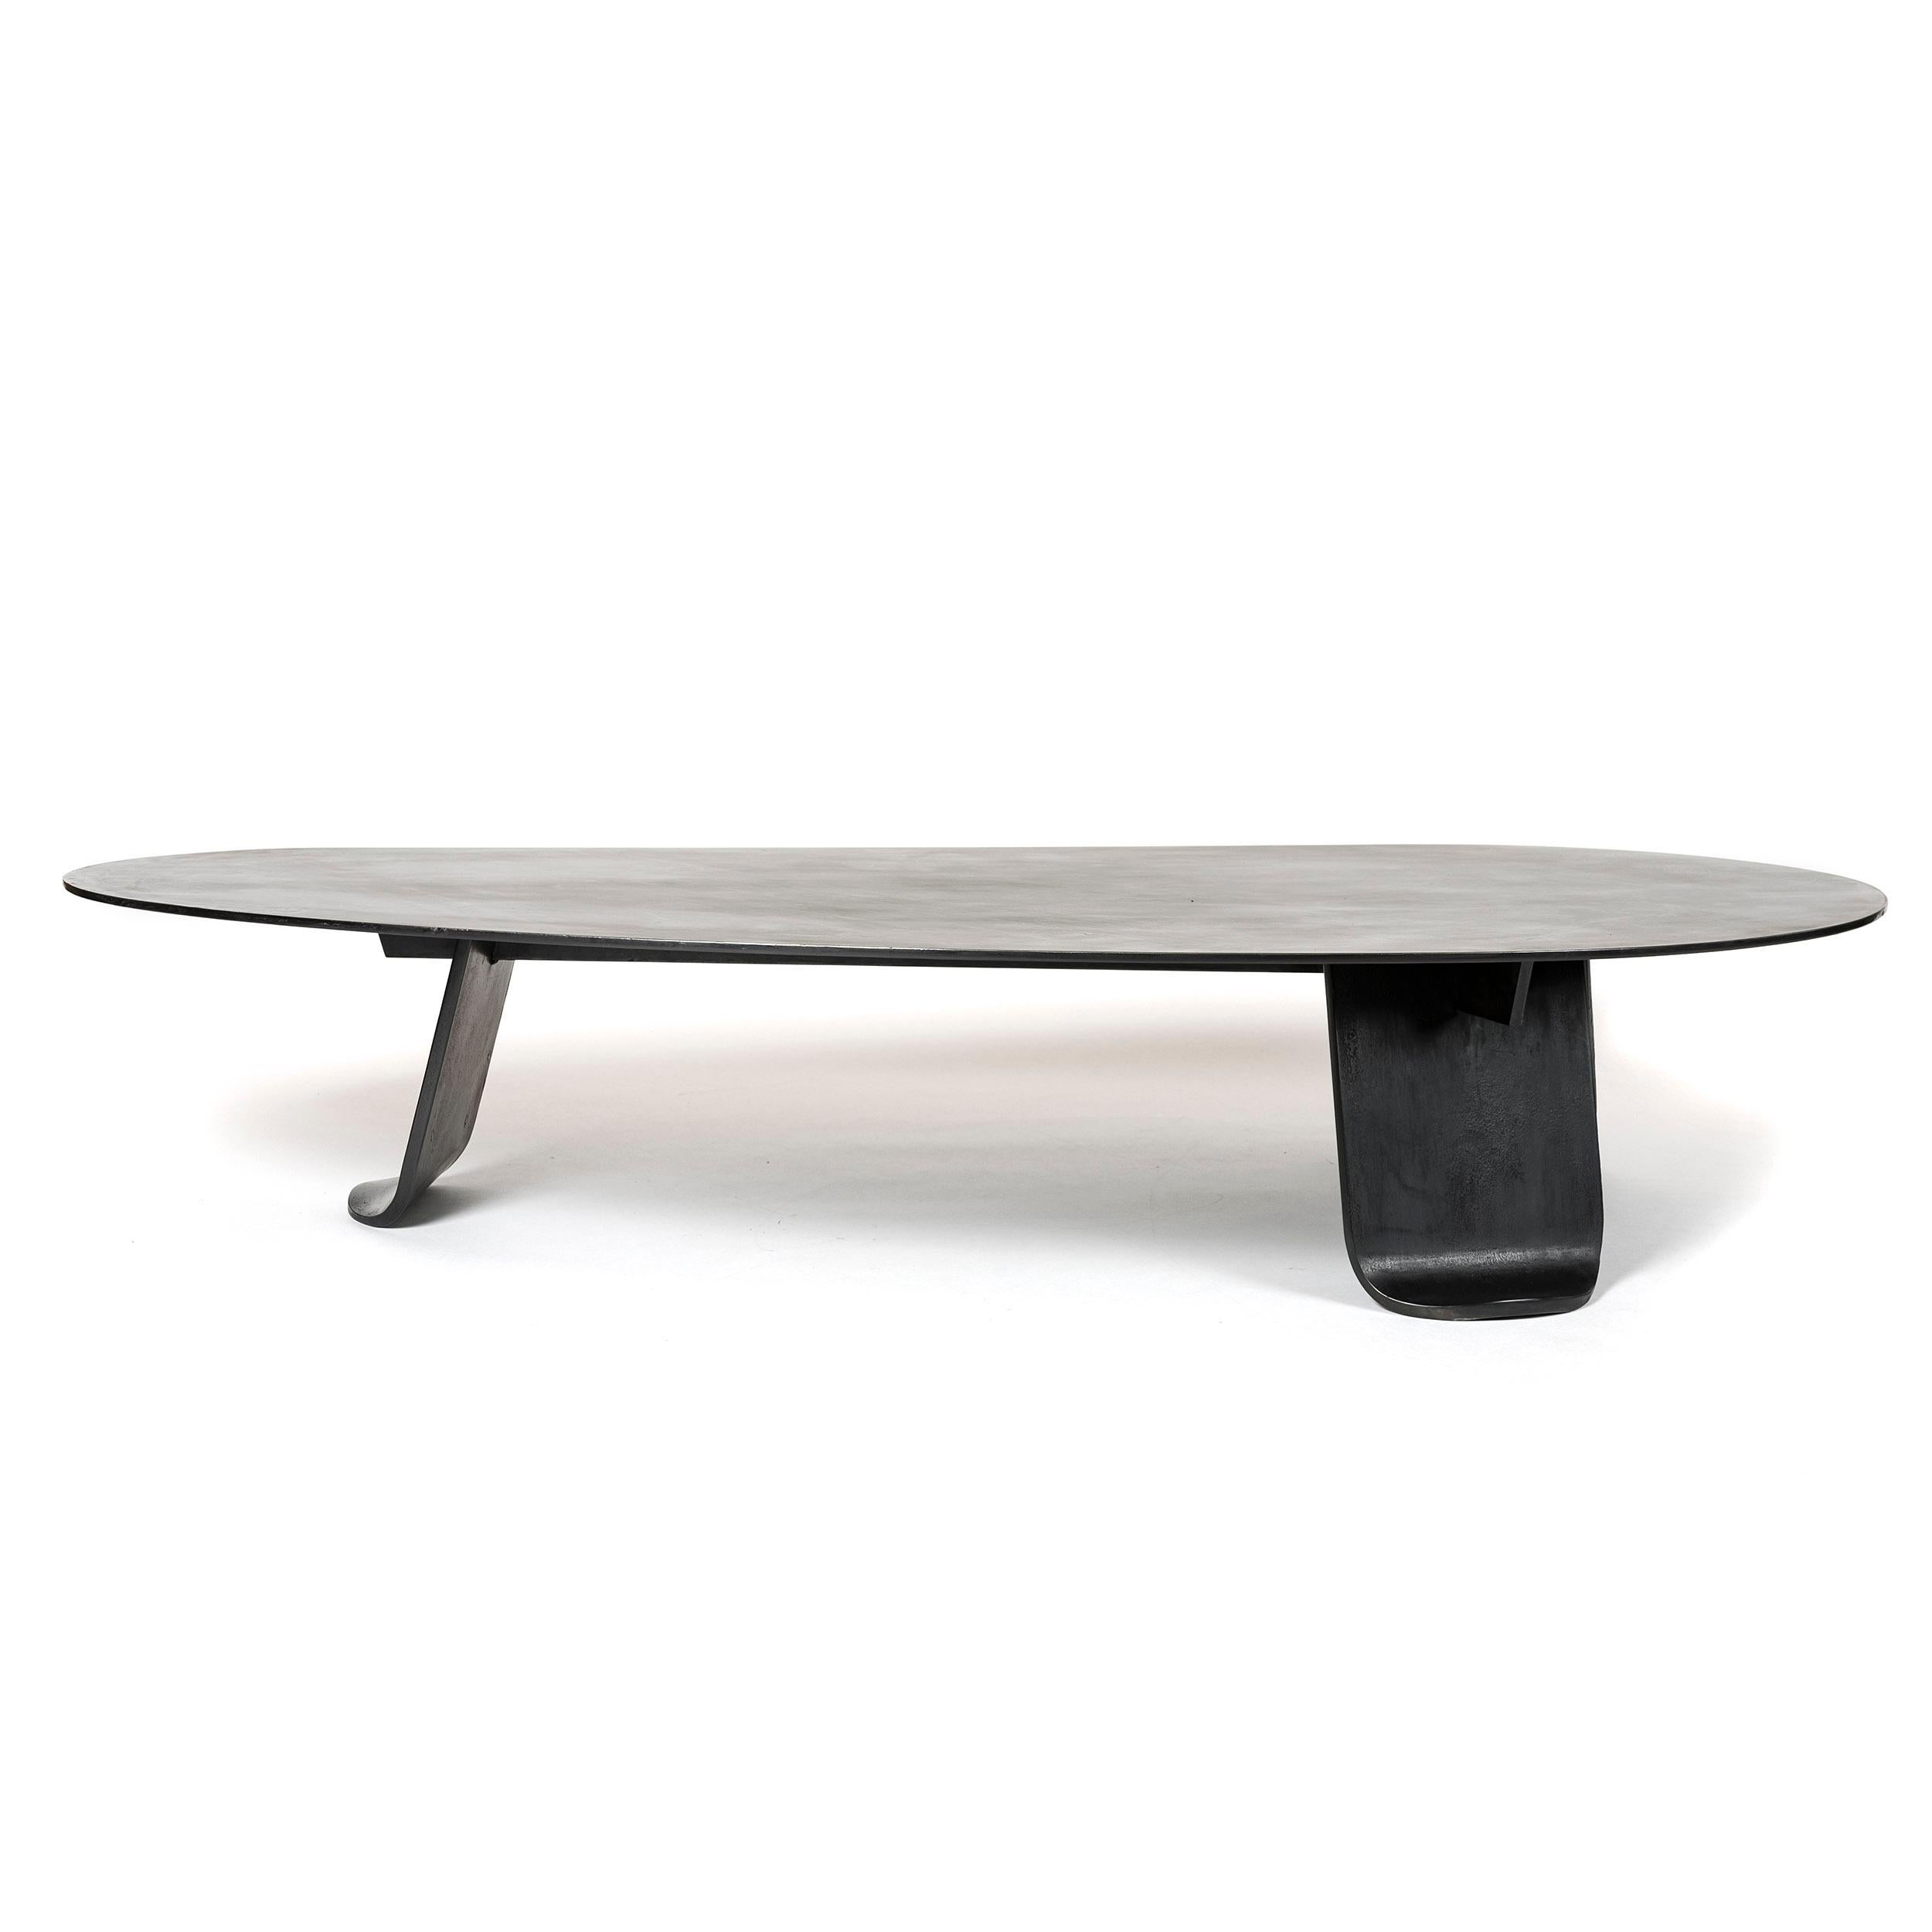 A low coffee / cocktail table of thick, plate steel treated with hot zinc and patinated a low sheen black. The expansive, organically shaped top is set upon three wide, thick plate steel legs each having gradually tapering sides terminating in